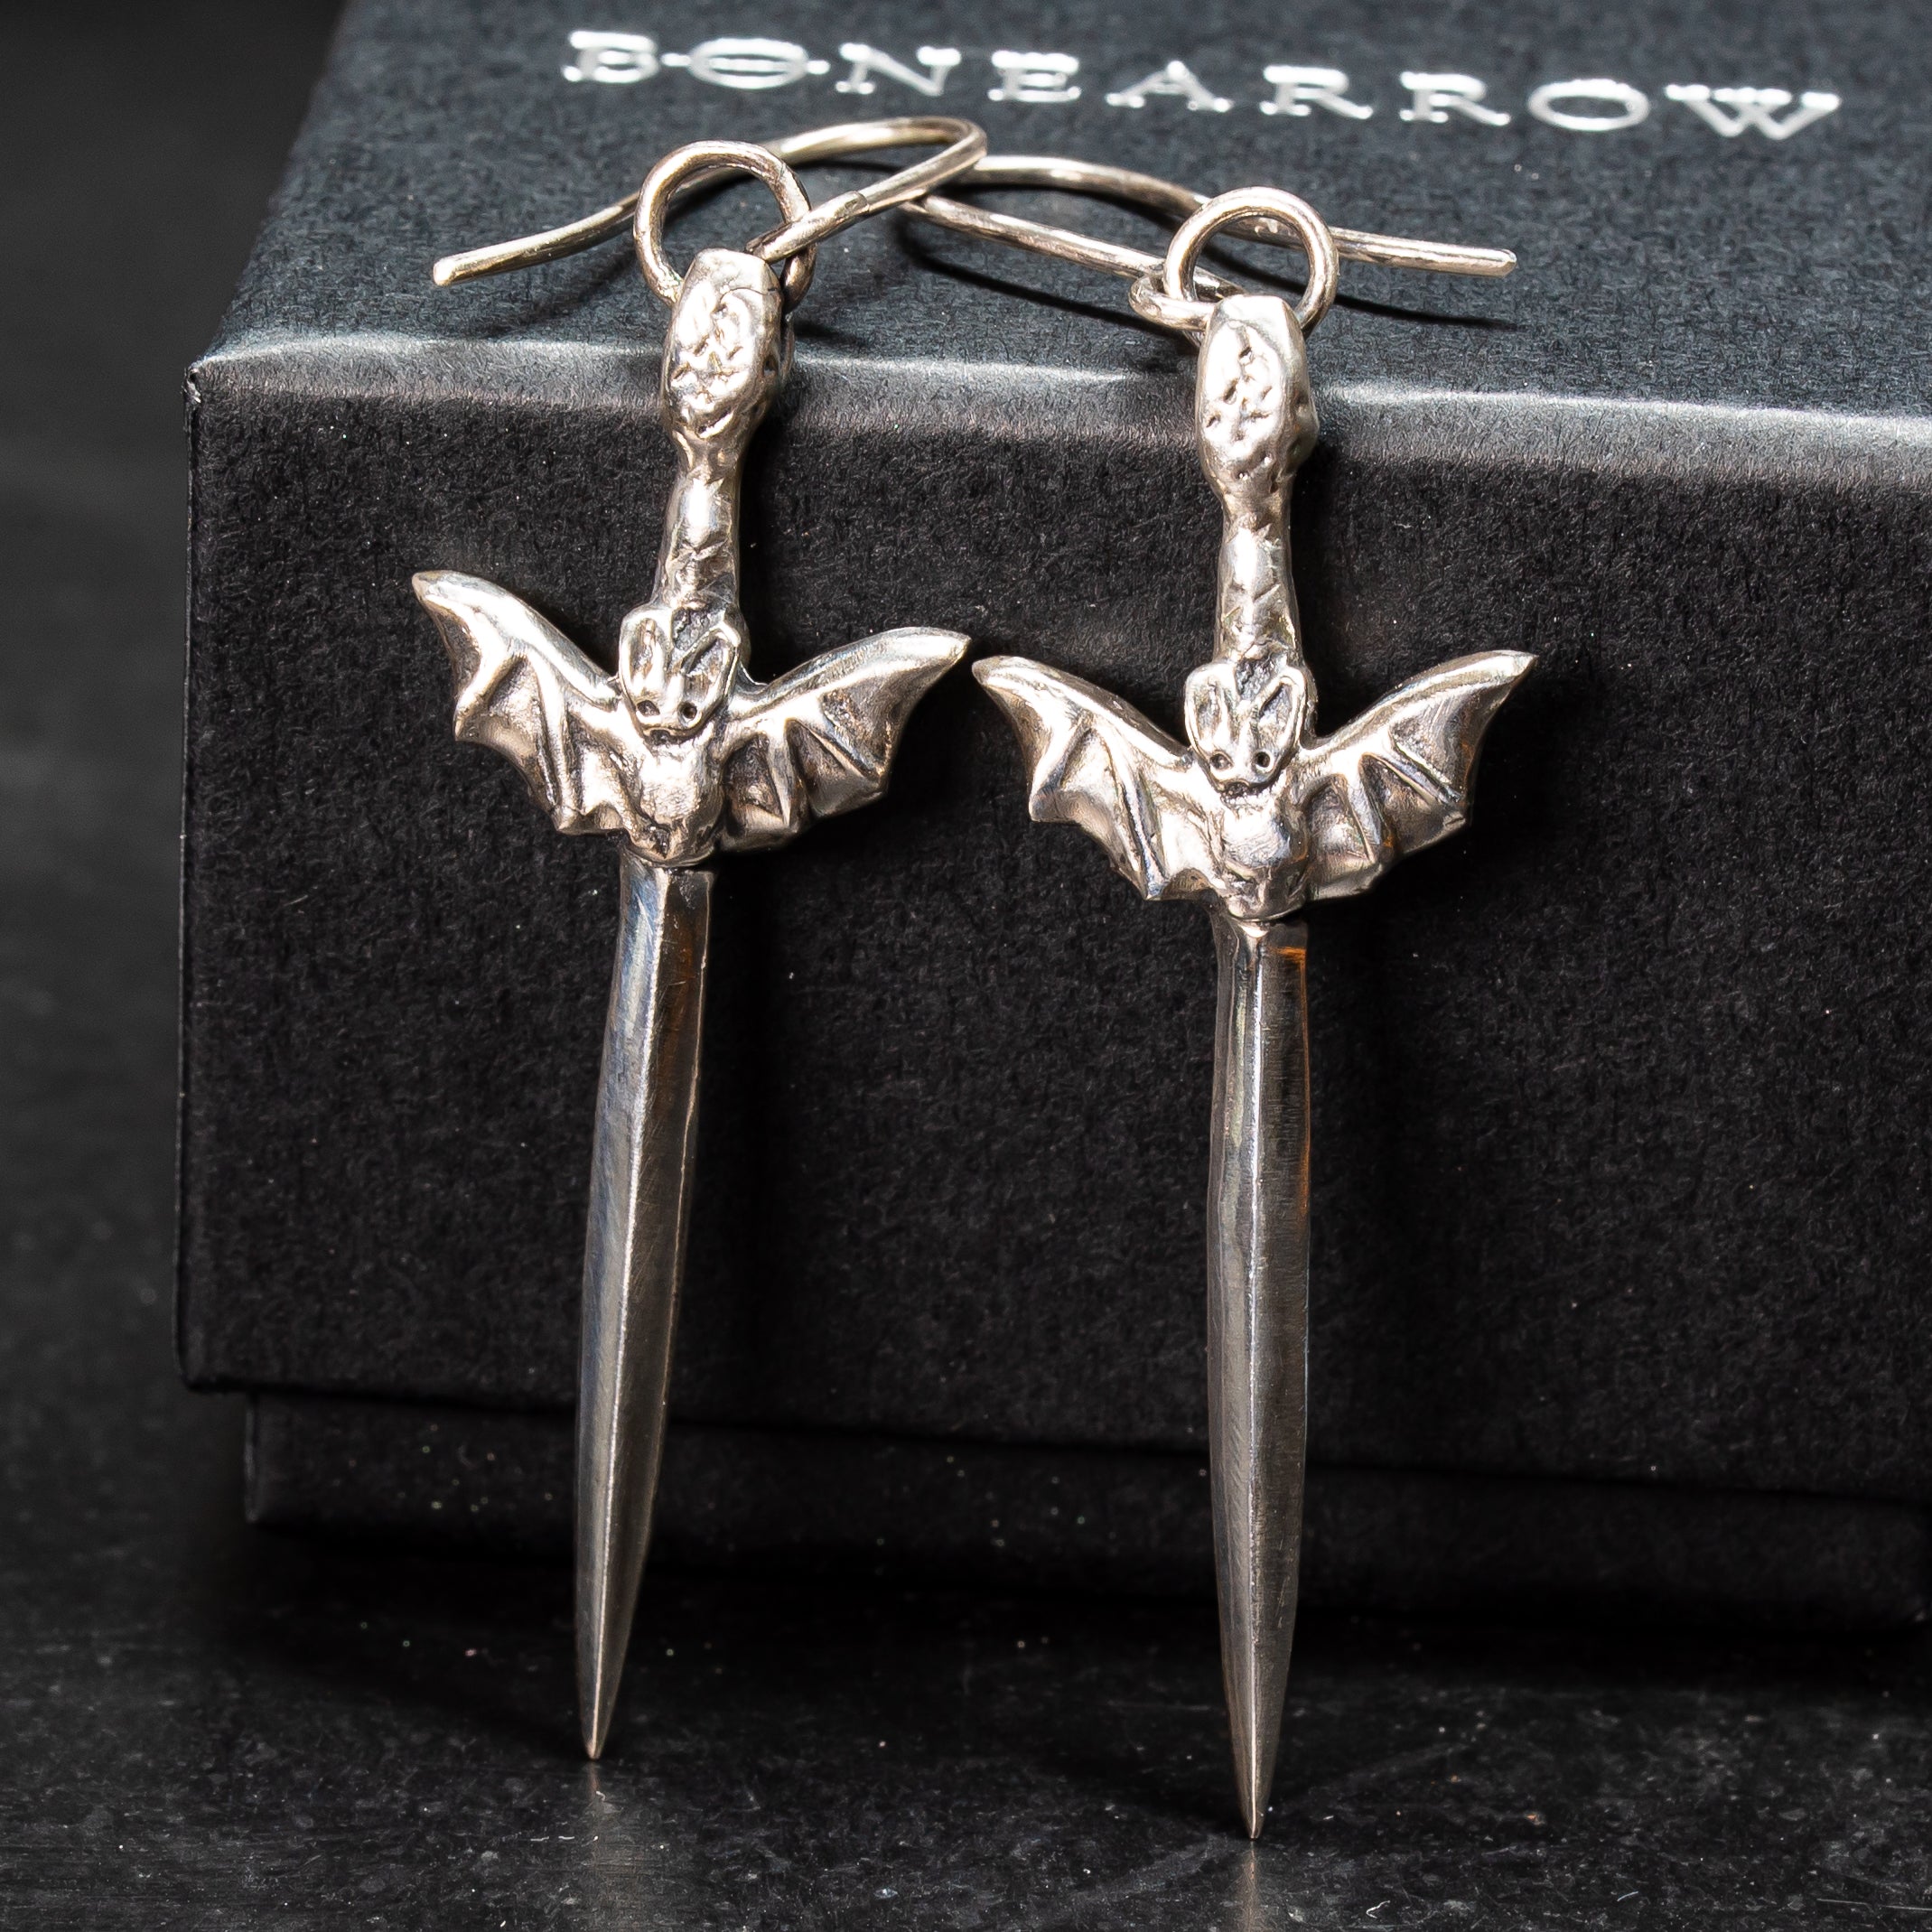 Two gothic sword earrings with bats